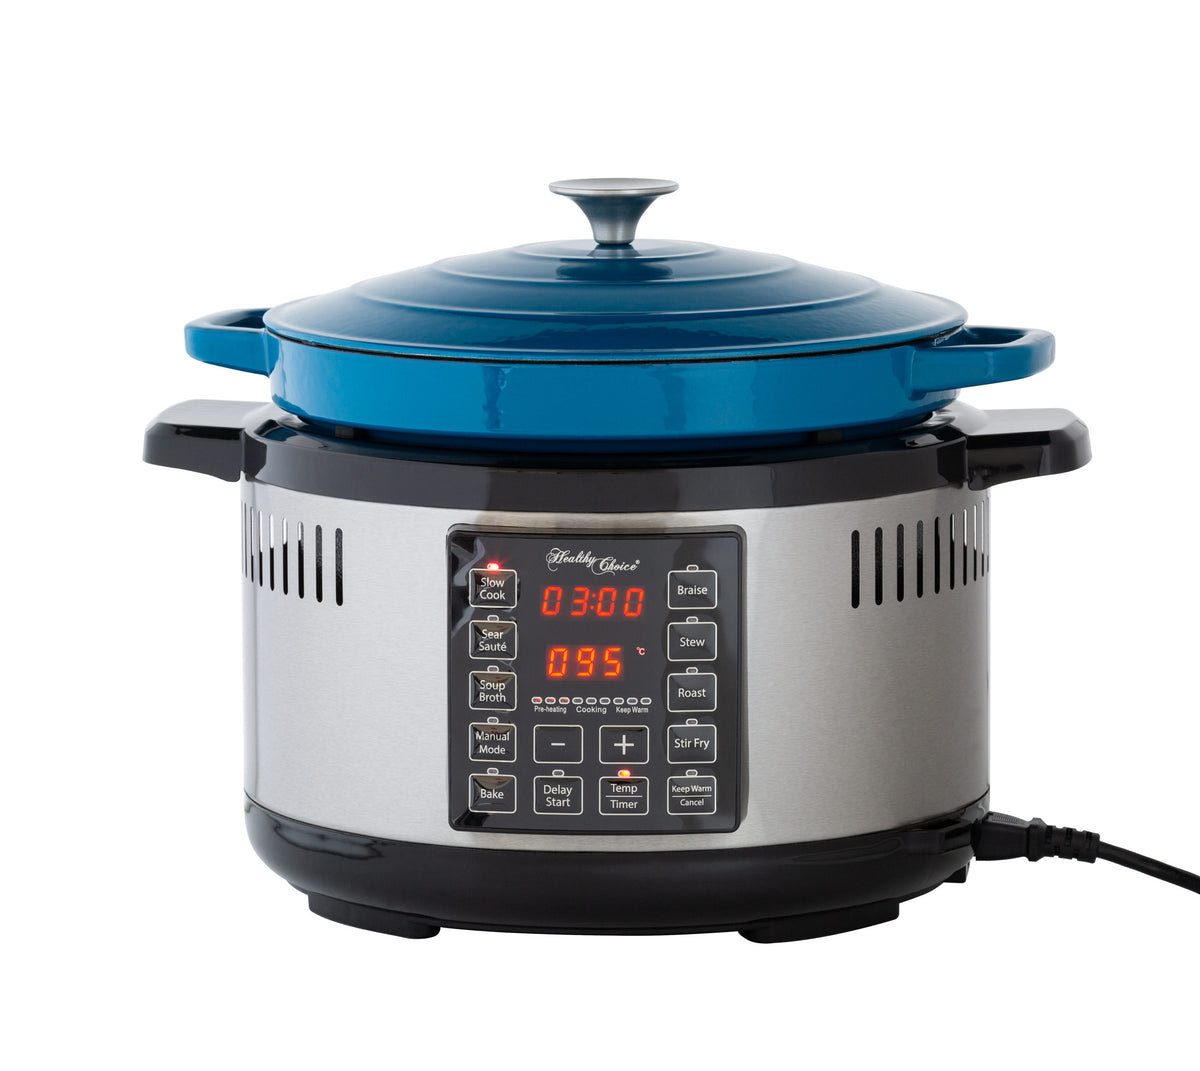 Front view of the 6.5L Intelligent Digital Dutch Oven with blue enamelled cast iron pot and slow cook option turned on.